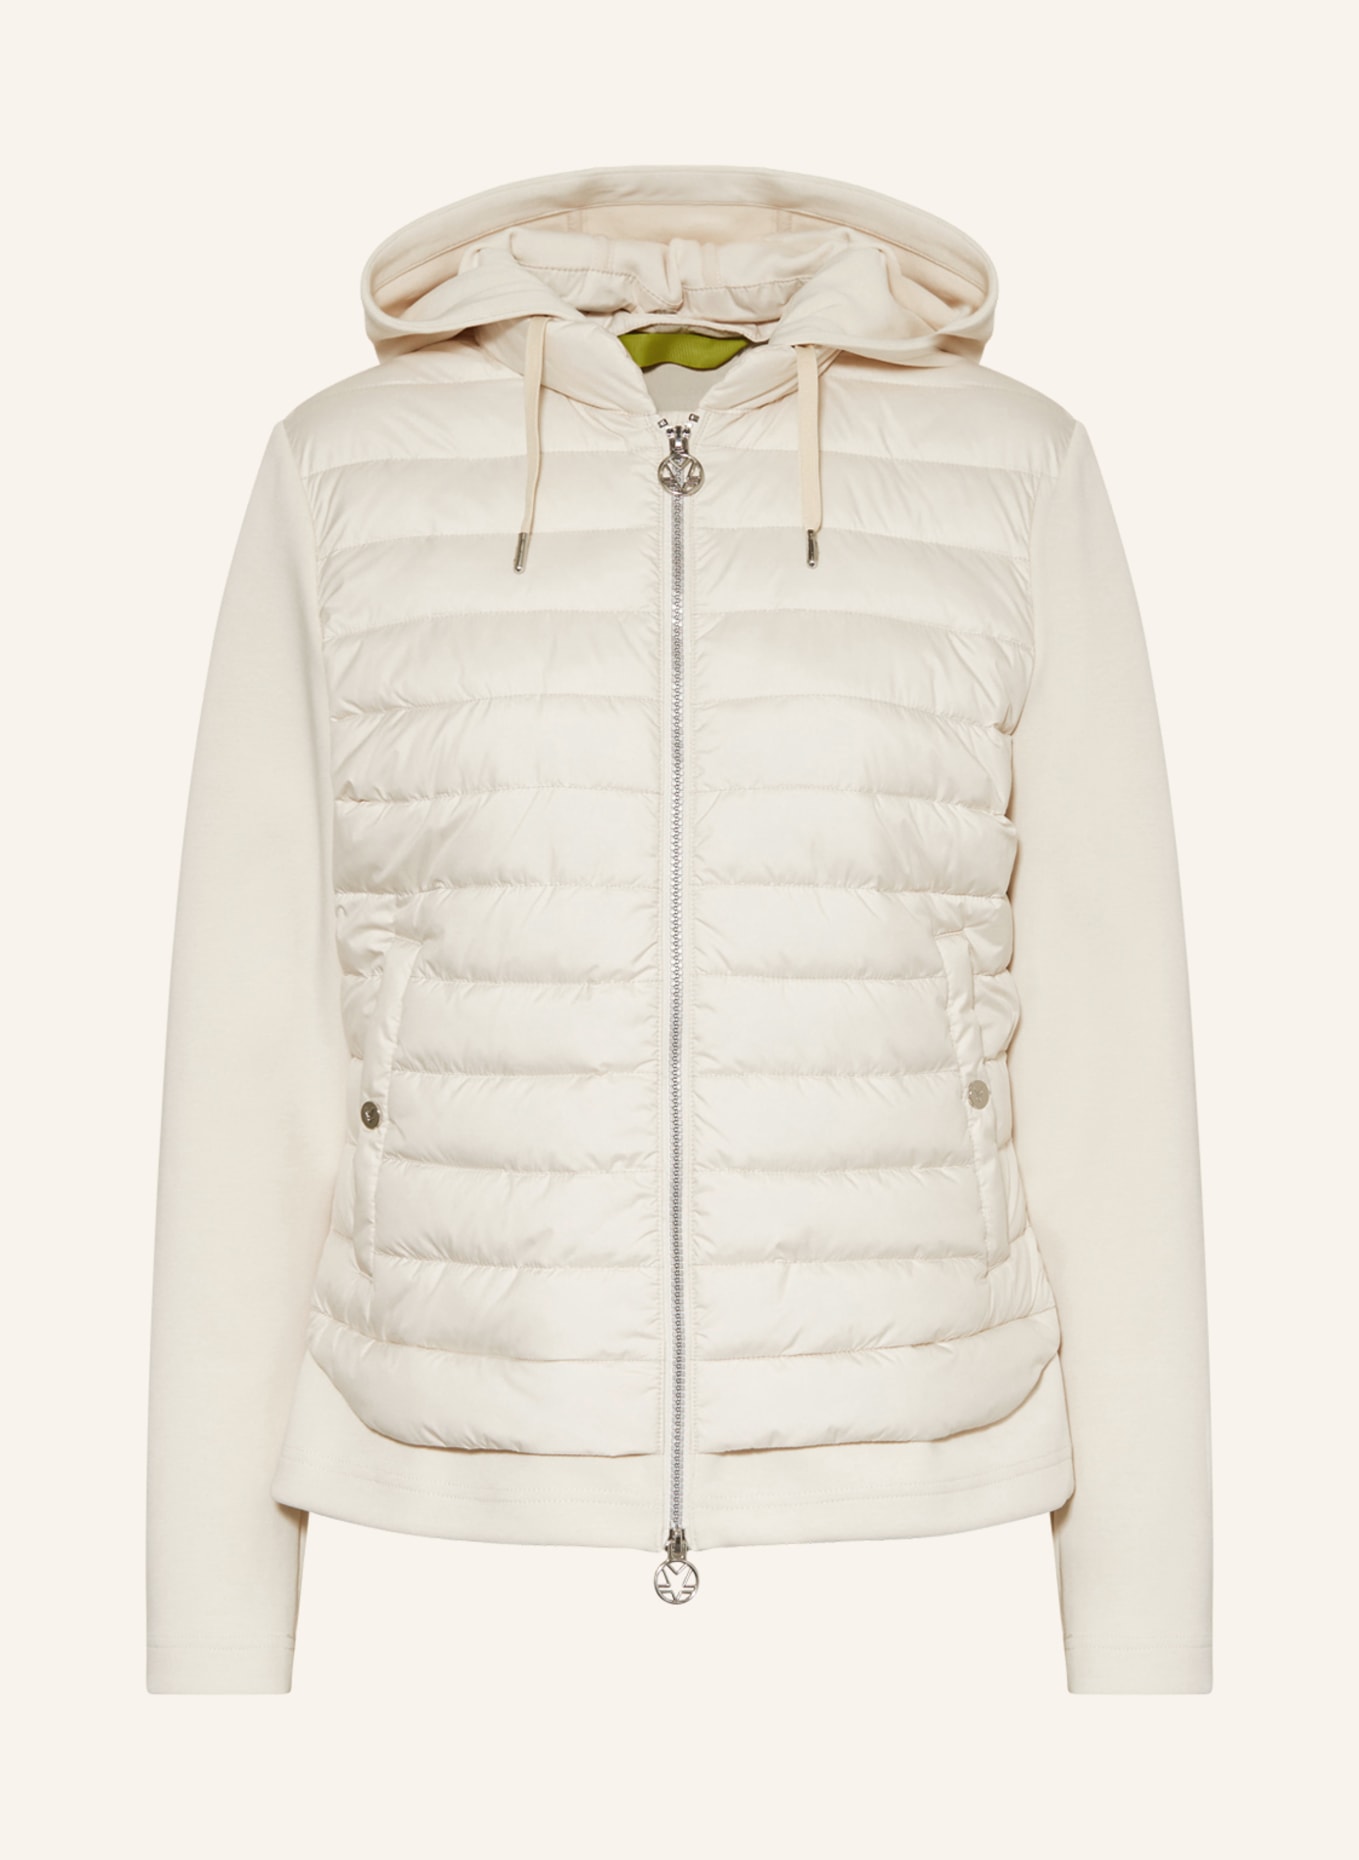 FUCHS SCHMITT Jacket in a material mix with detachable hood, Color: CREAM (Image 1)